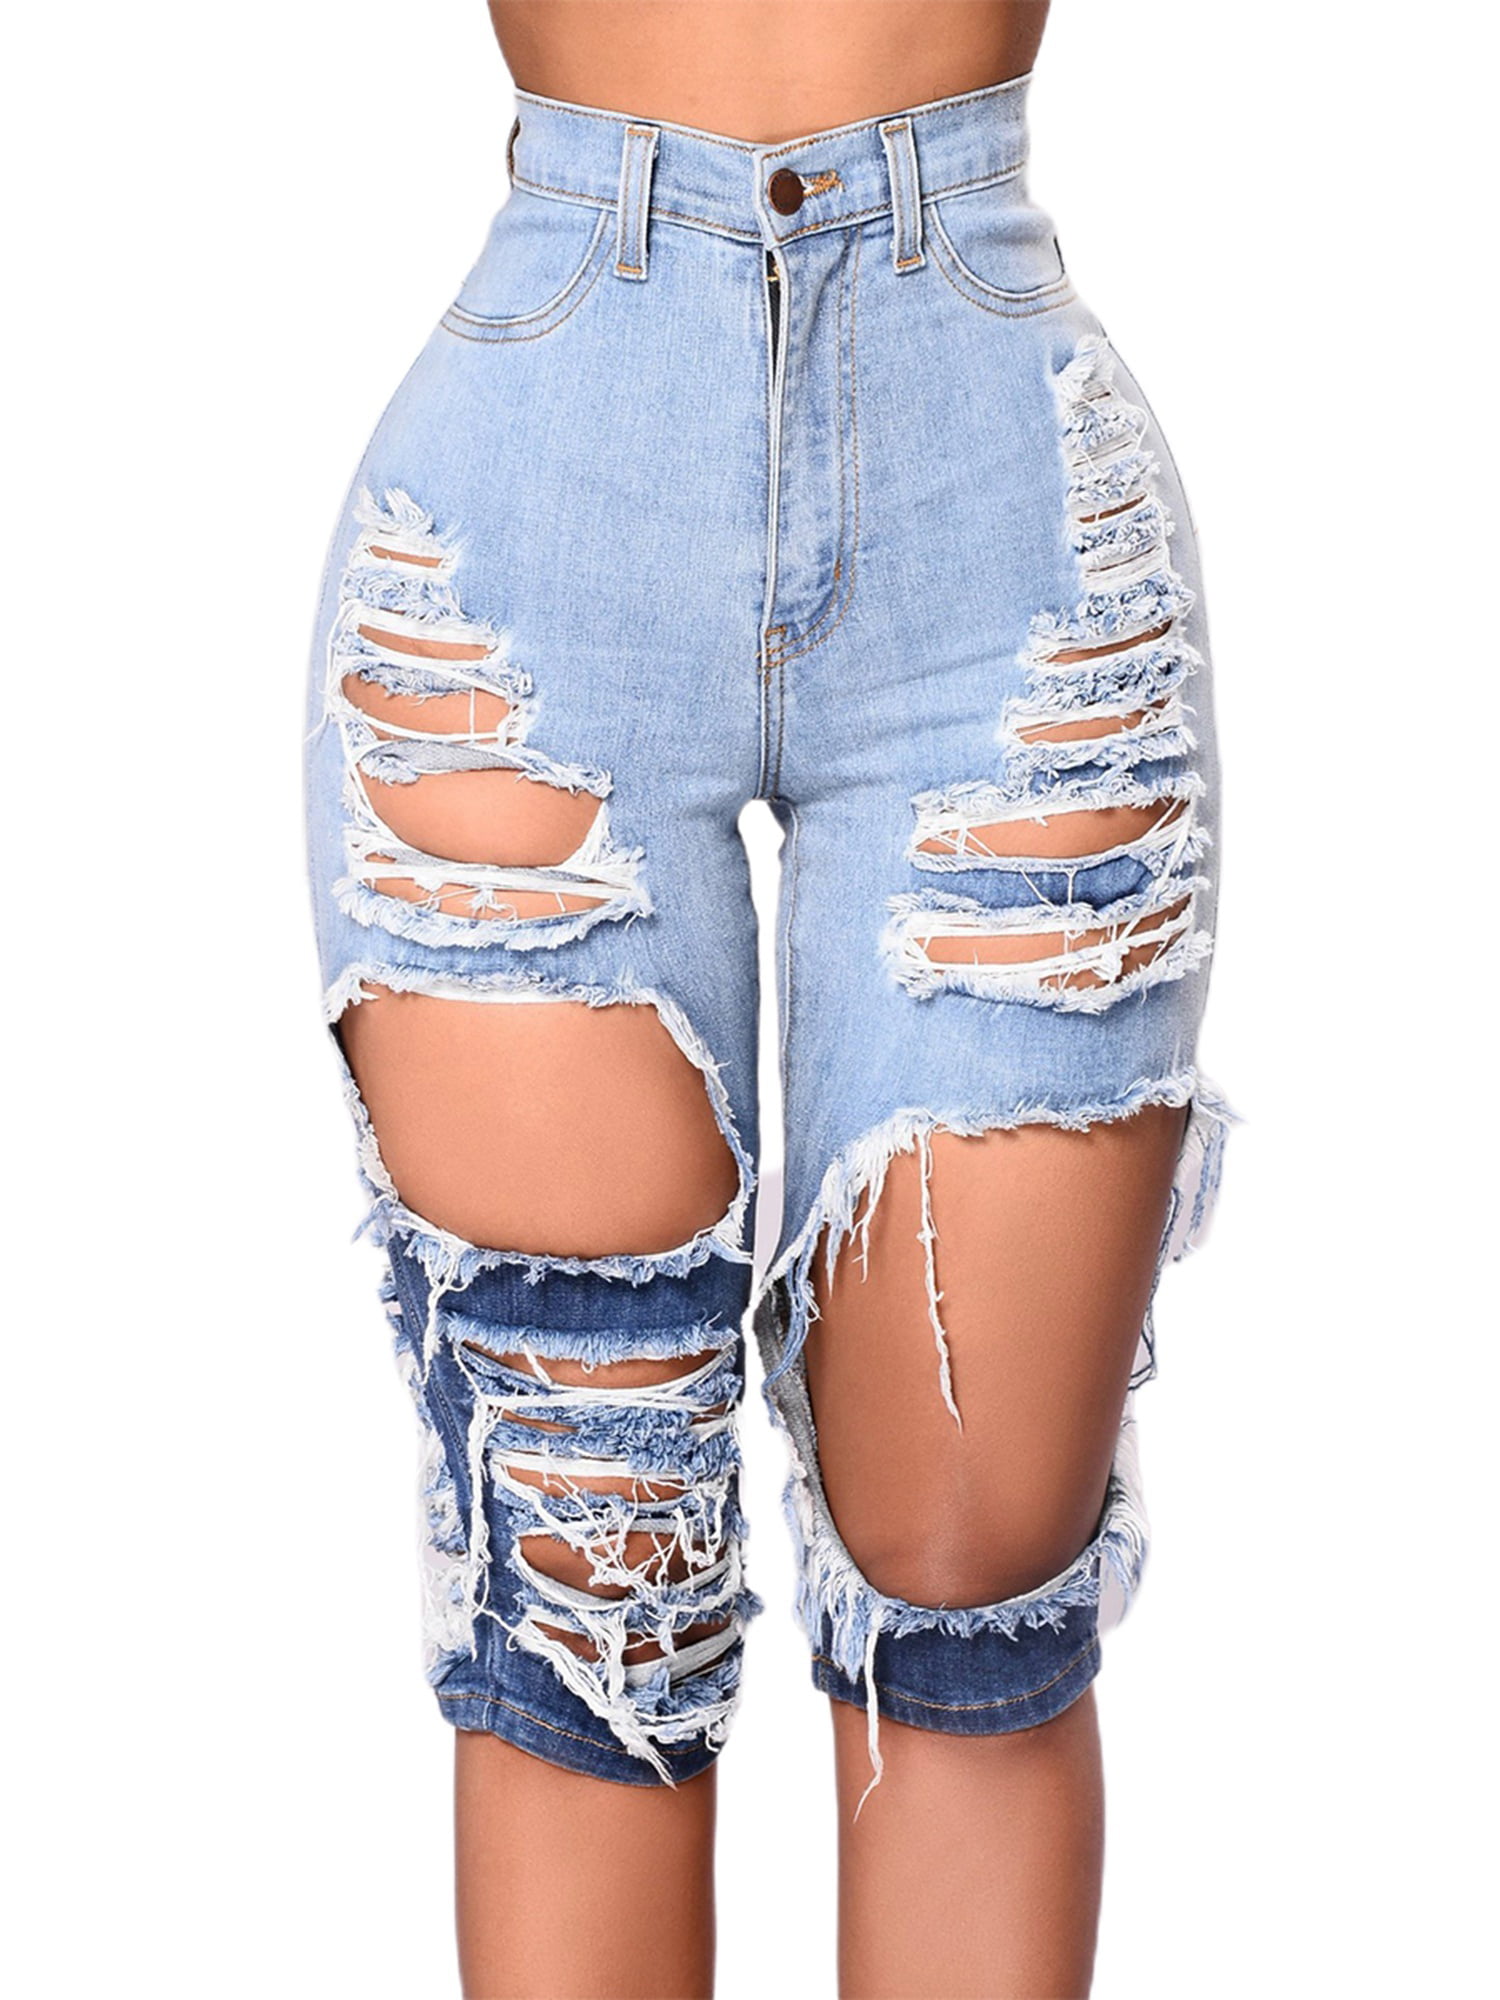 Female Ripped Jeans Fashionable High Waist Jeans Close Fitting Pants For Women S M L Xl Xxl